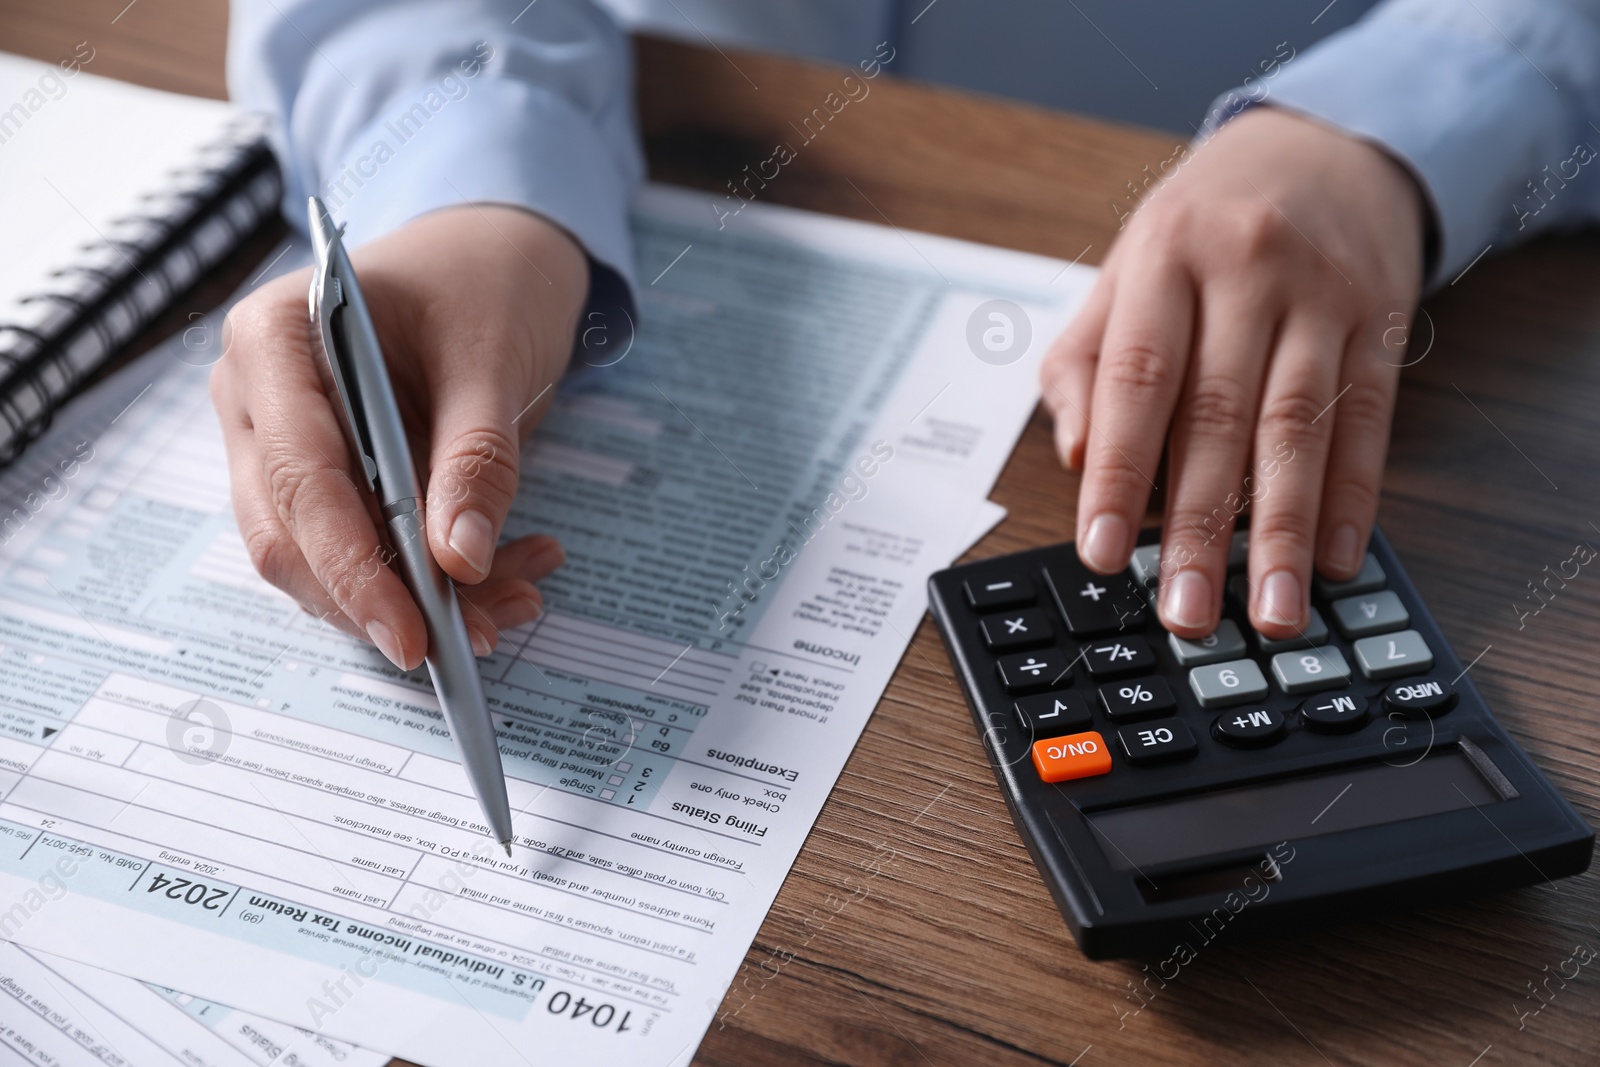 Photo of Payroll. Woman using calculator while working with tax return forms at wooden table, closeup